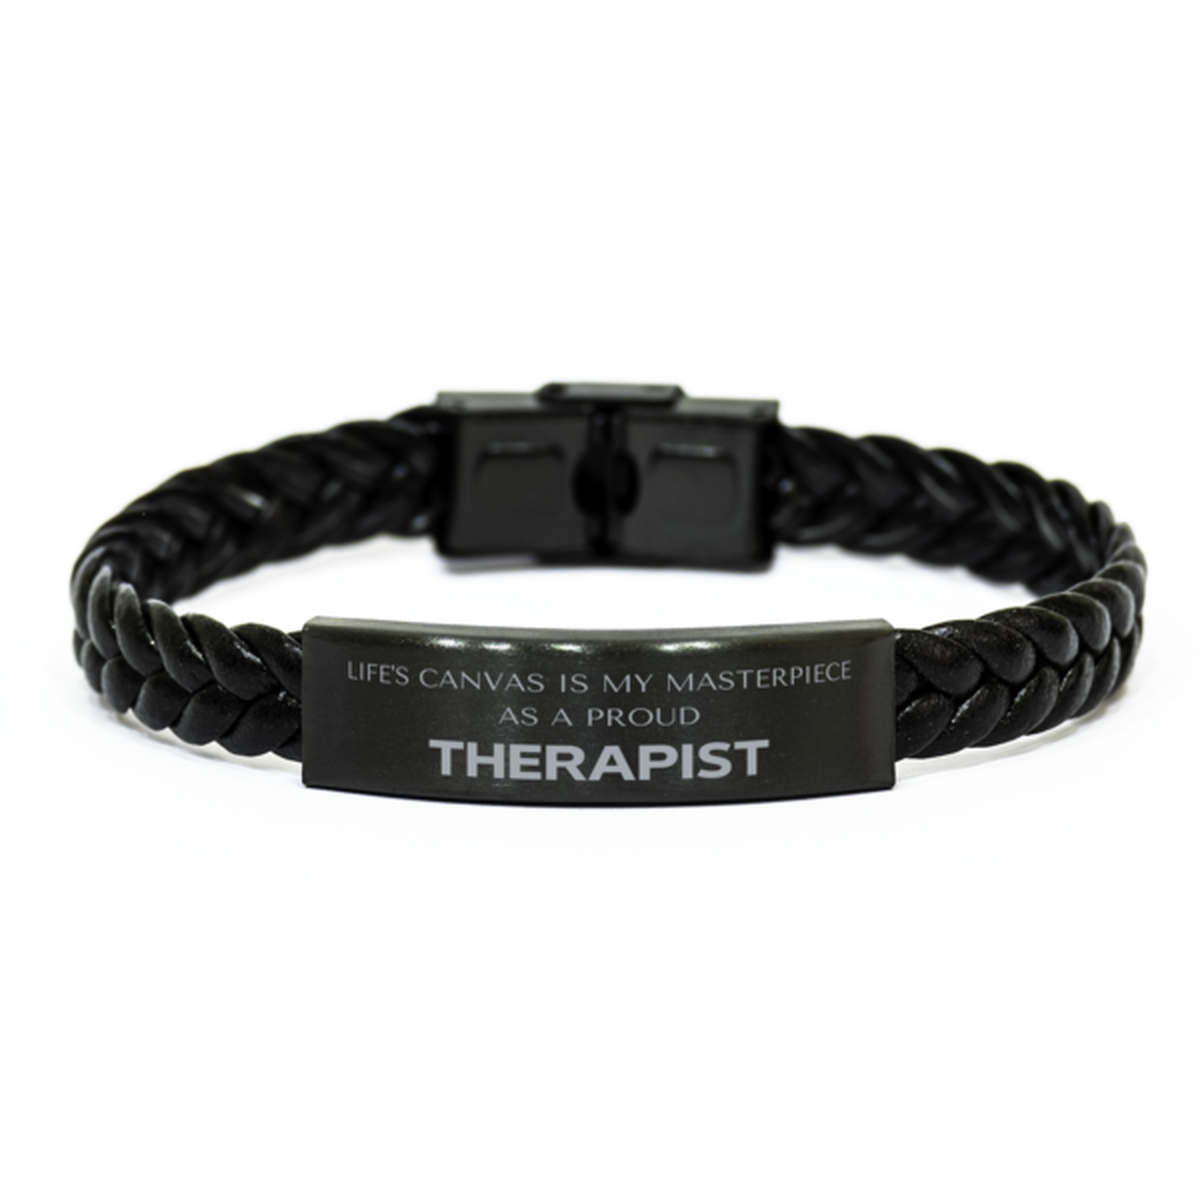 Proud Therapist Gifts, Life's canvas is my masterpiece, Epic Birthday Christmas Unique Braided Leather Bracelet For Therapist, Coworkers, Men, Women, Friends